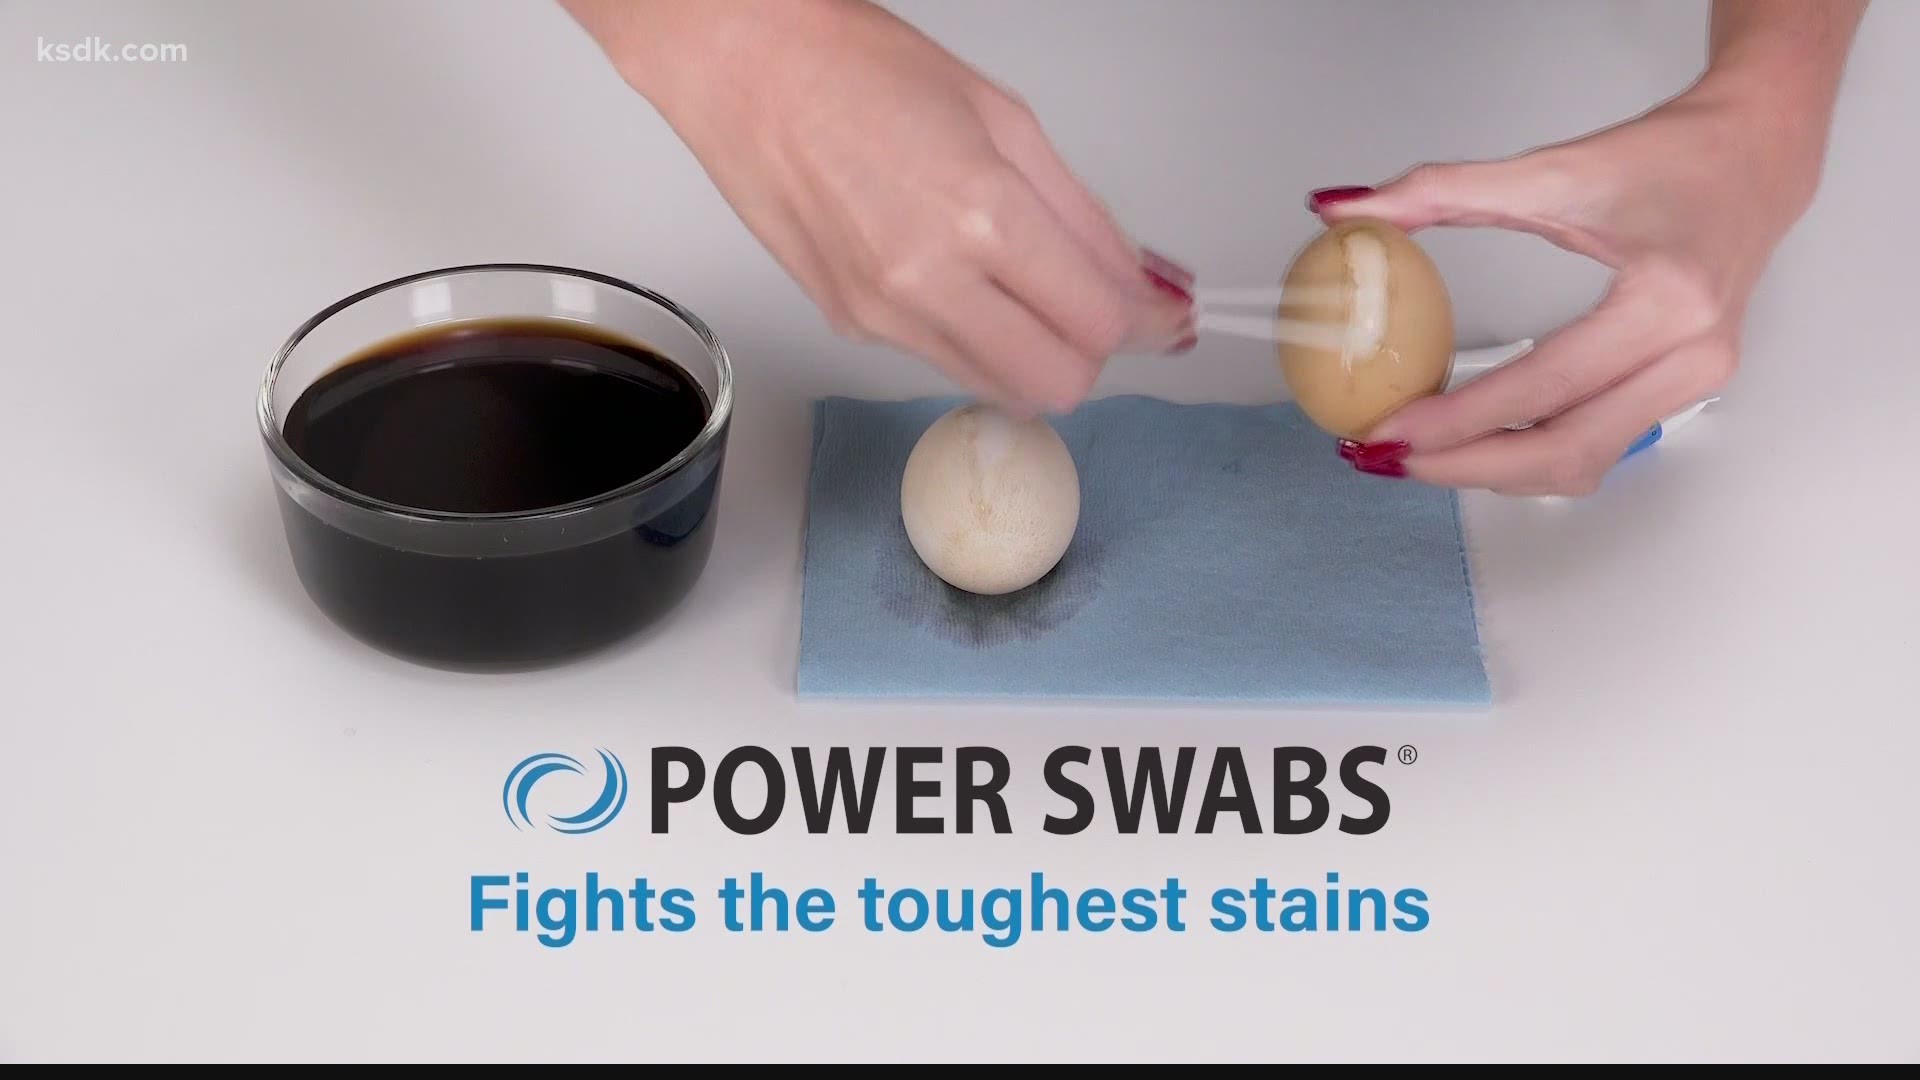 If you think your teeth could be whiter, now is the time to try Power Swabs!